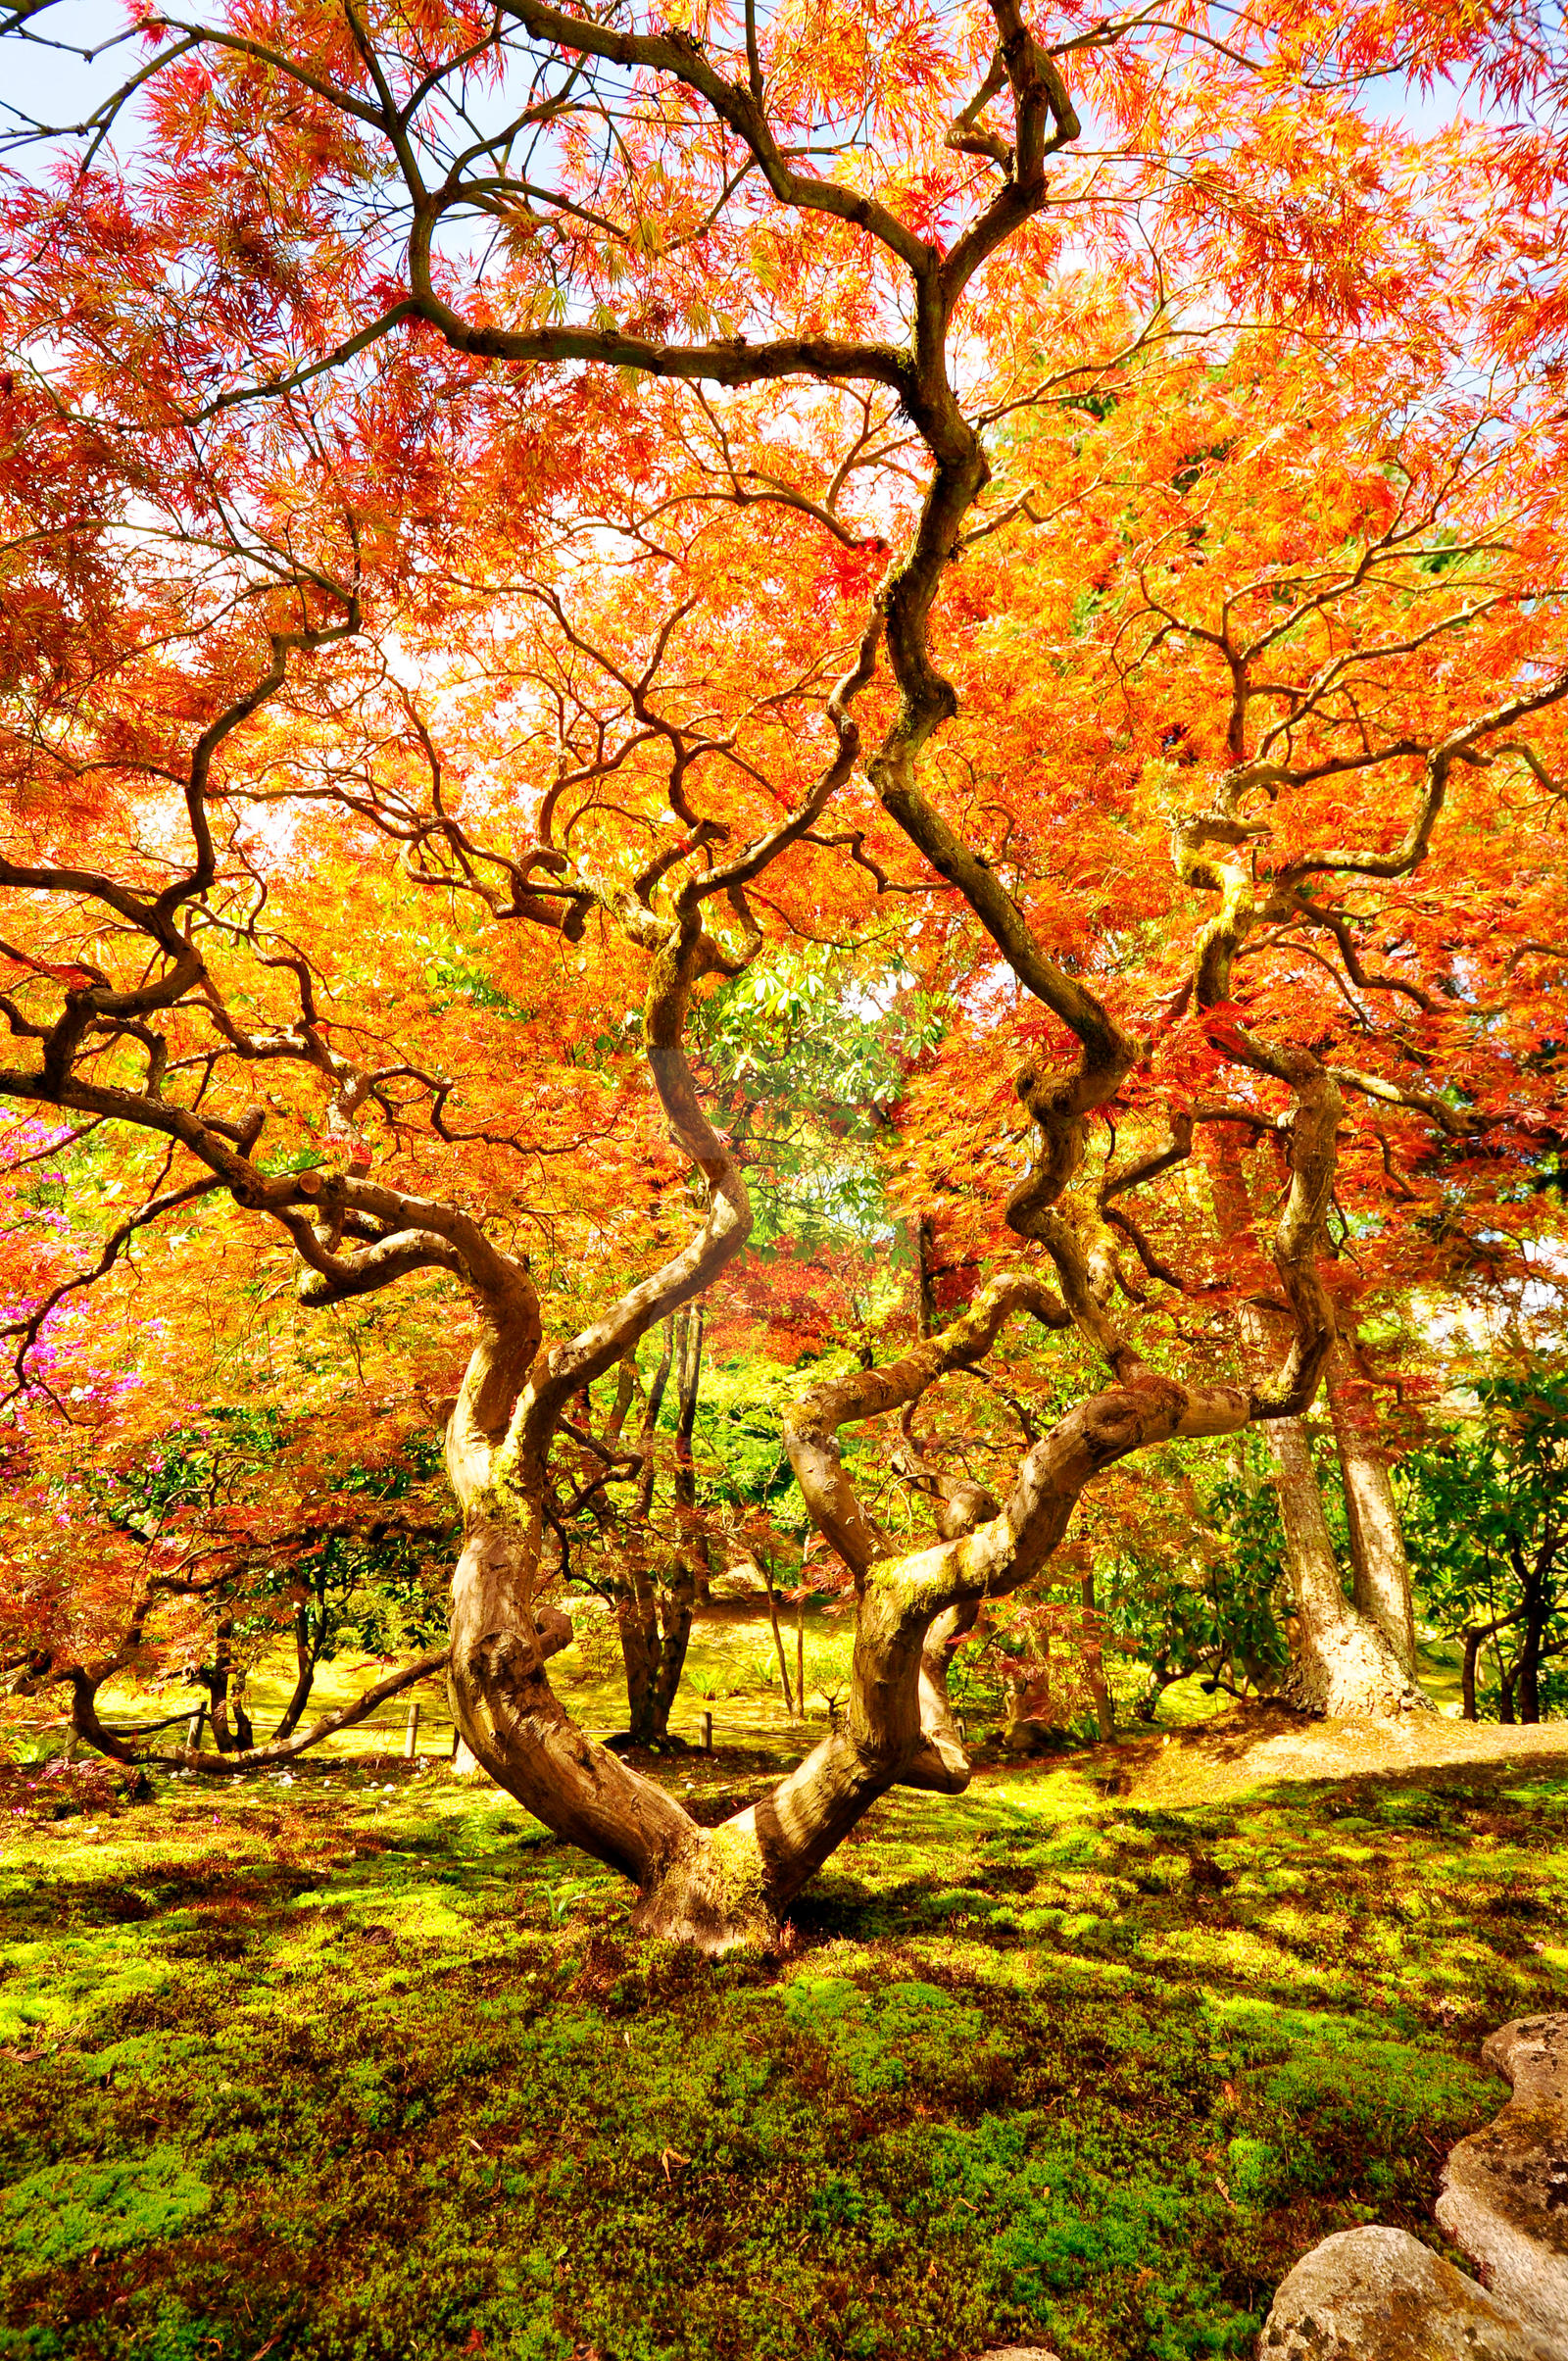 Changing Seasons by TimFranklin on DeviantArt